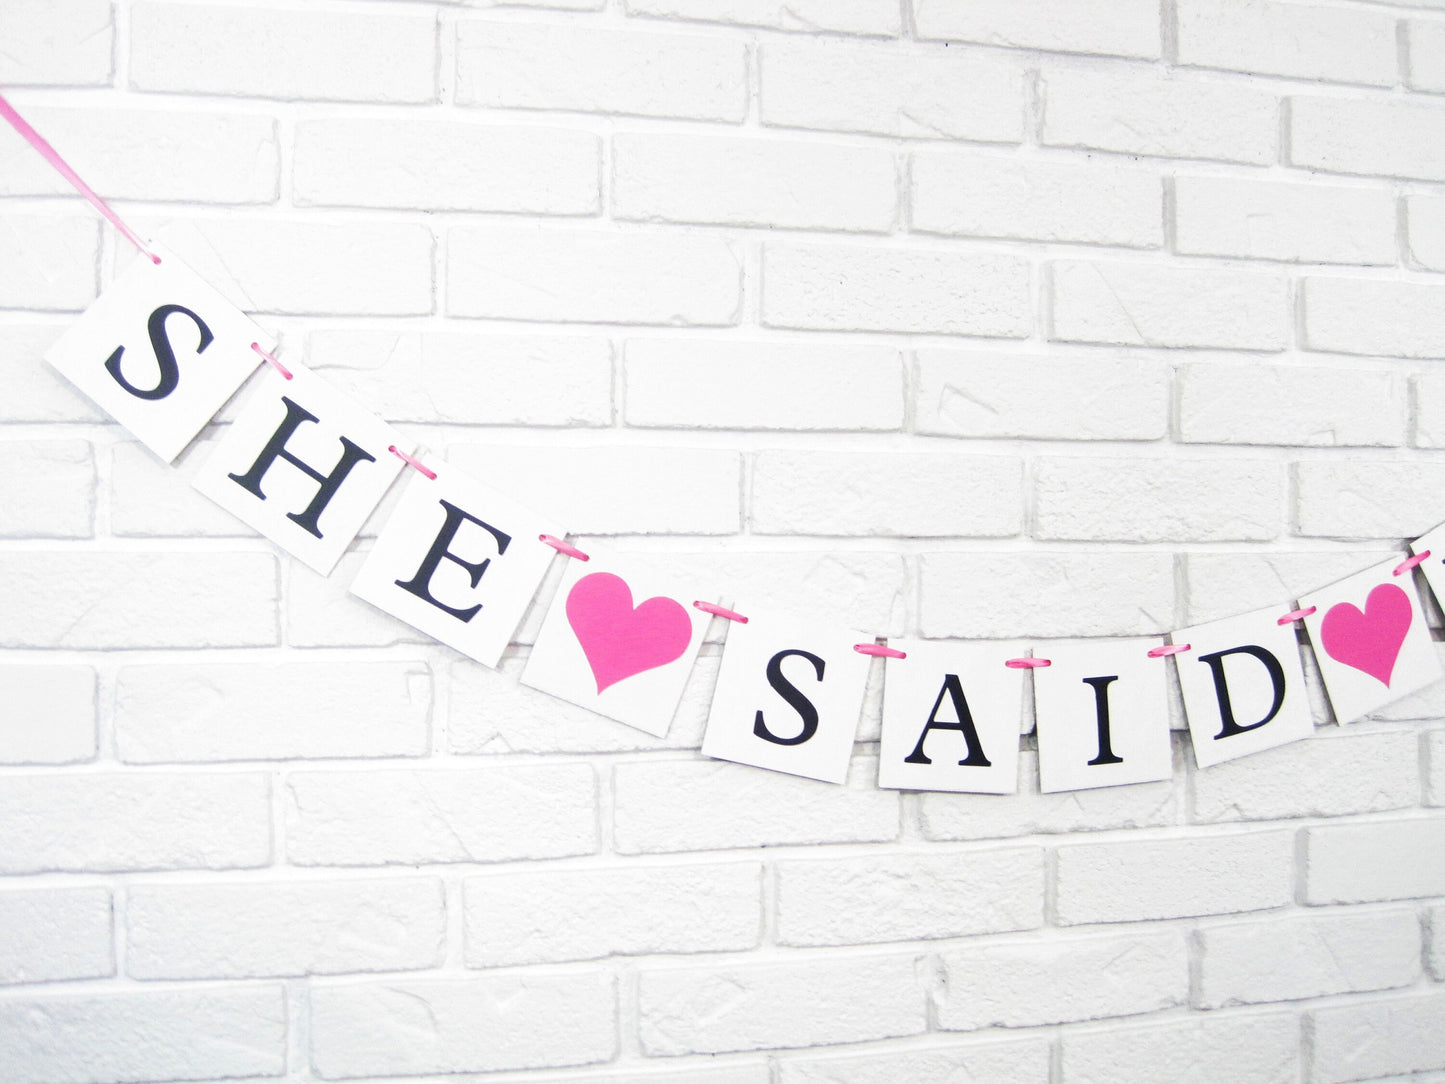 She Said Yes Banner - Hearts